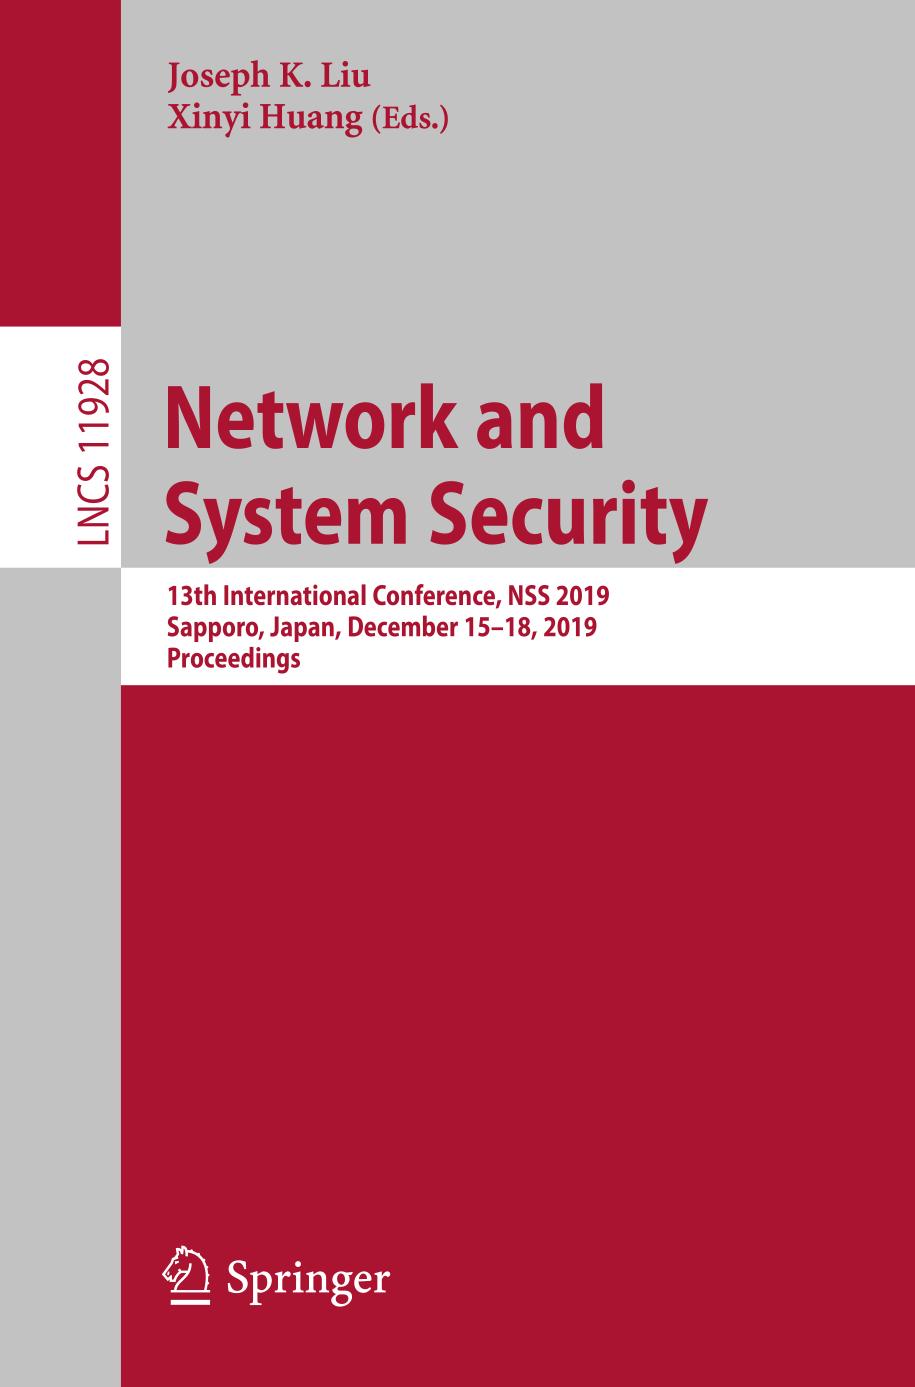 Network and System Security : 13th International Conference, NSS 2019, Sapporo, Japan, December 15-18, 2019, Proceedings